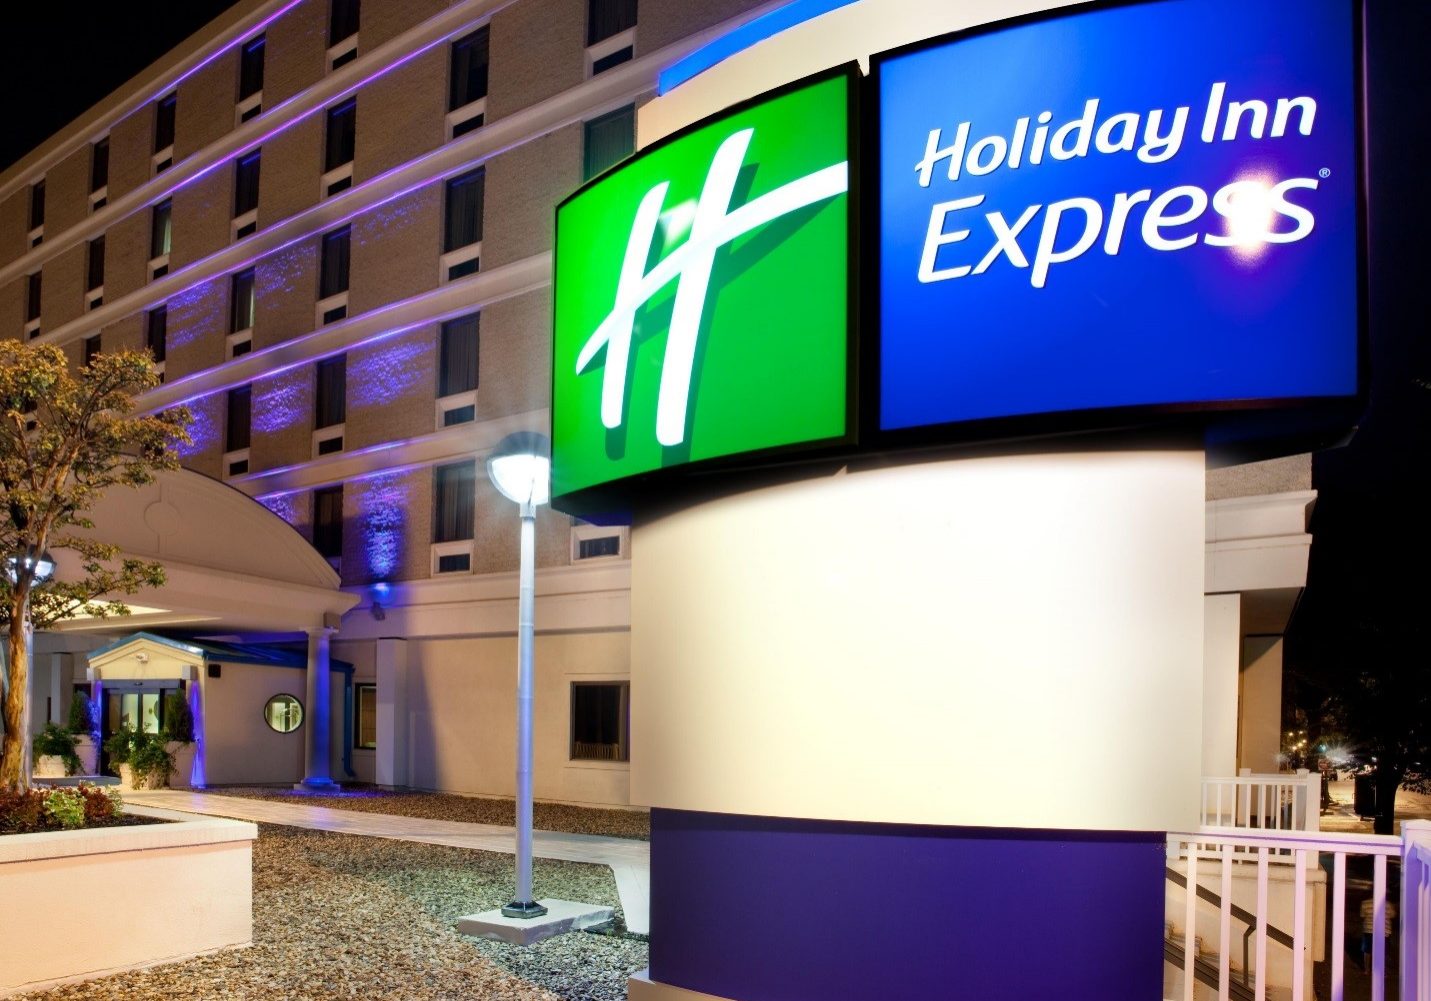 The Holiday Inn Express is 1 mile from the Tournament Venue.